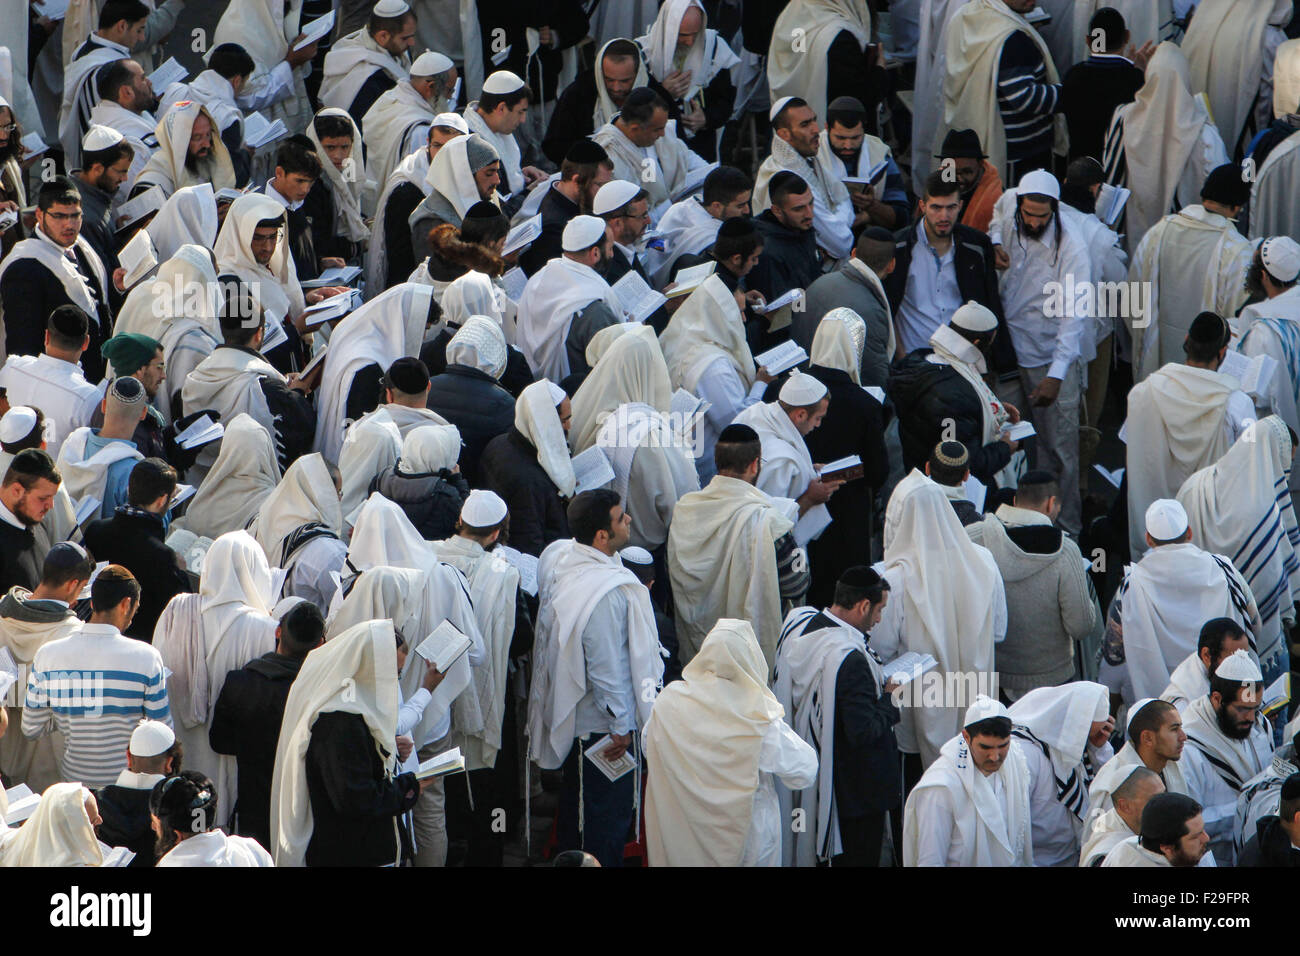 Uman, Ukraine. 13th Sep, 2015. Orthodox Jewish pilgrims hold 'Torah' during during the celebration of Rosh Hashanah in Uman. Every year, thousands of Orthodox Bratslav Hasidic Jews from different countries gather in Uman to mark 'Rosh Hashanah', a Jewish New Year near the tomb of Rabbi Nachman, the great grandson of the founder of Hasidism. © Nazar Furyk/Pacific Press/Alamy Live News Stock Photo